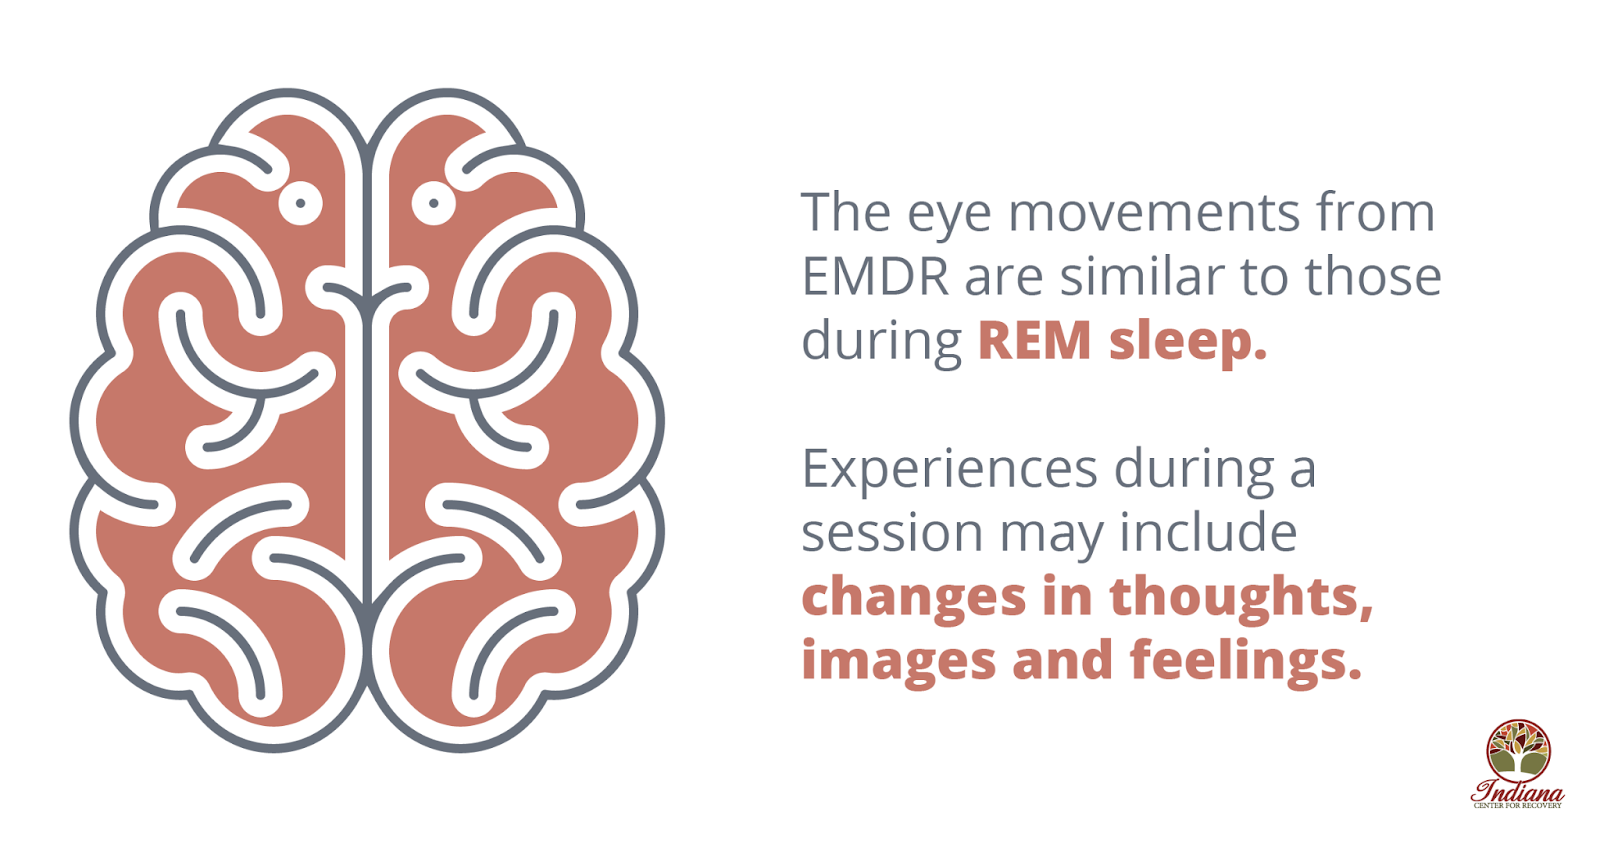 The eye movements from EMDR are similar to those during REM sleep. Experiences during a session may include changes in thoughts, images and feelings.